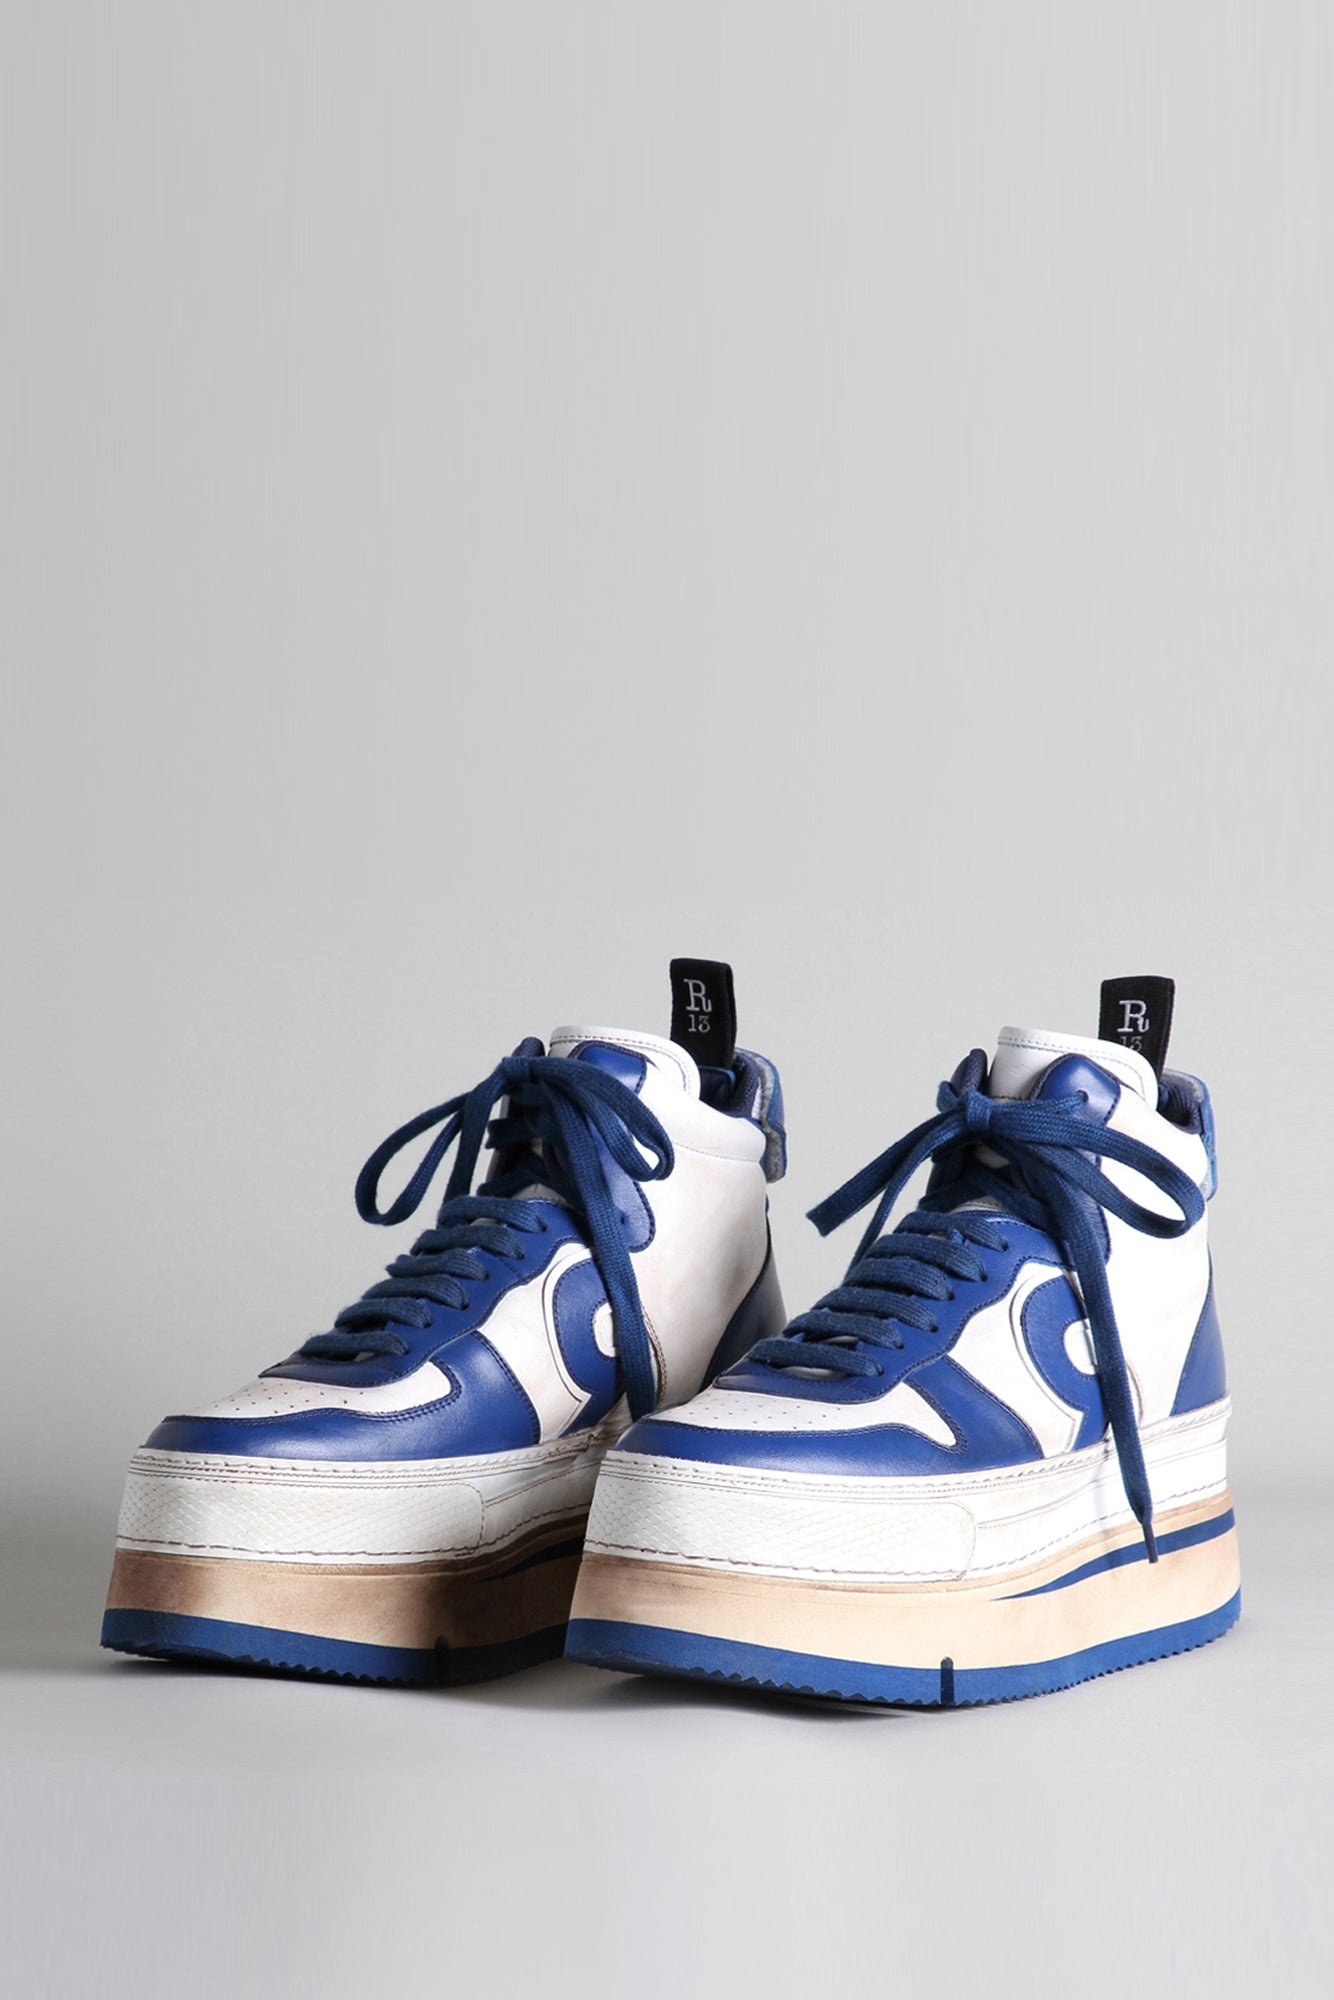 The Riot Leather High Top - Blue and White | R13 Denim Official Site - 1